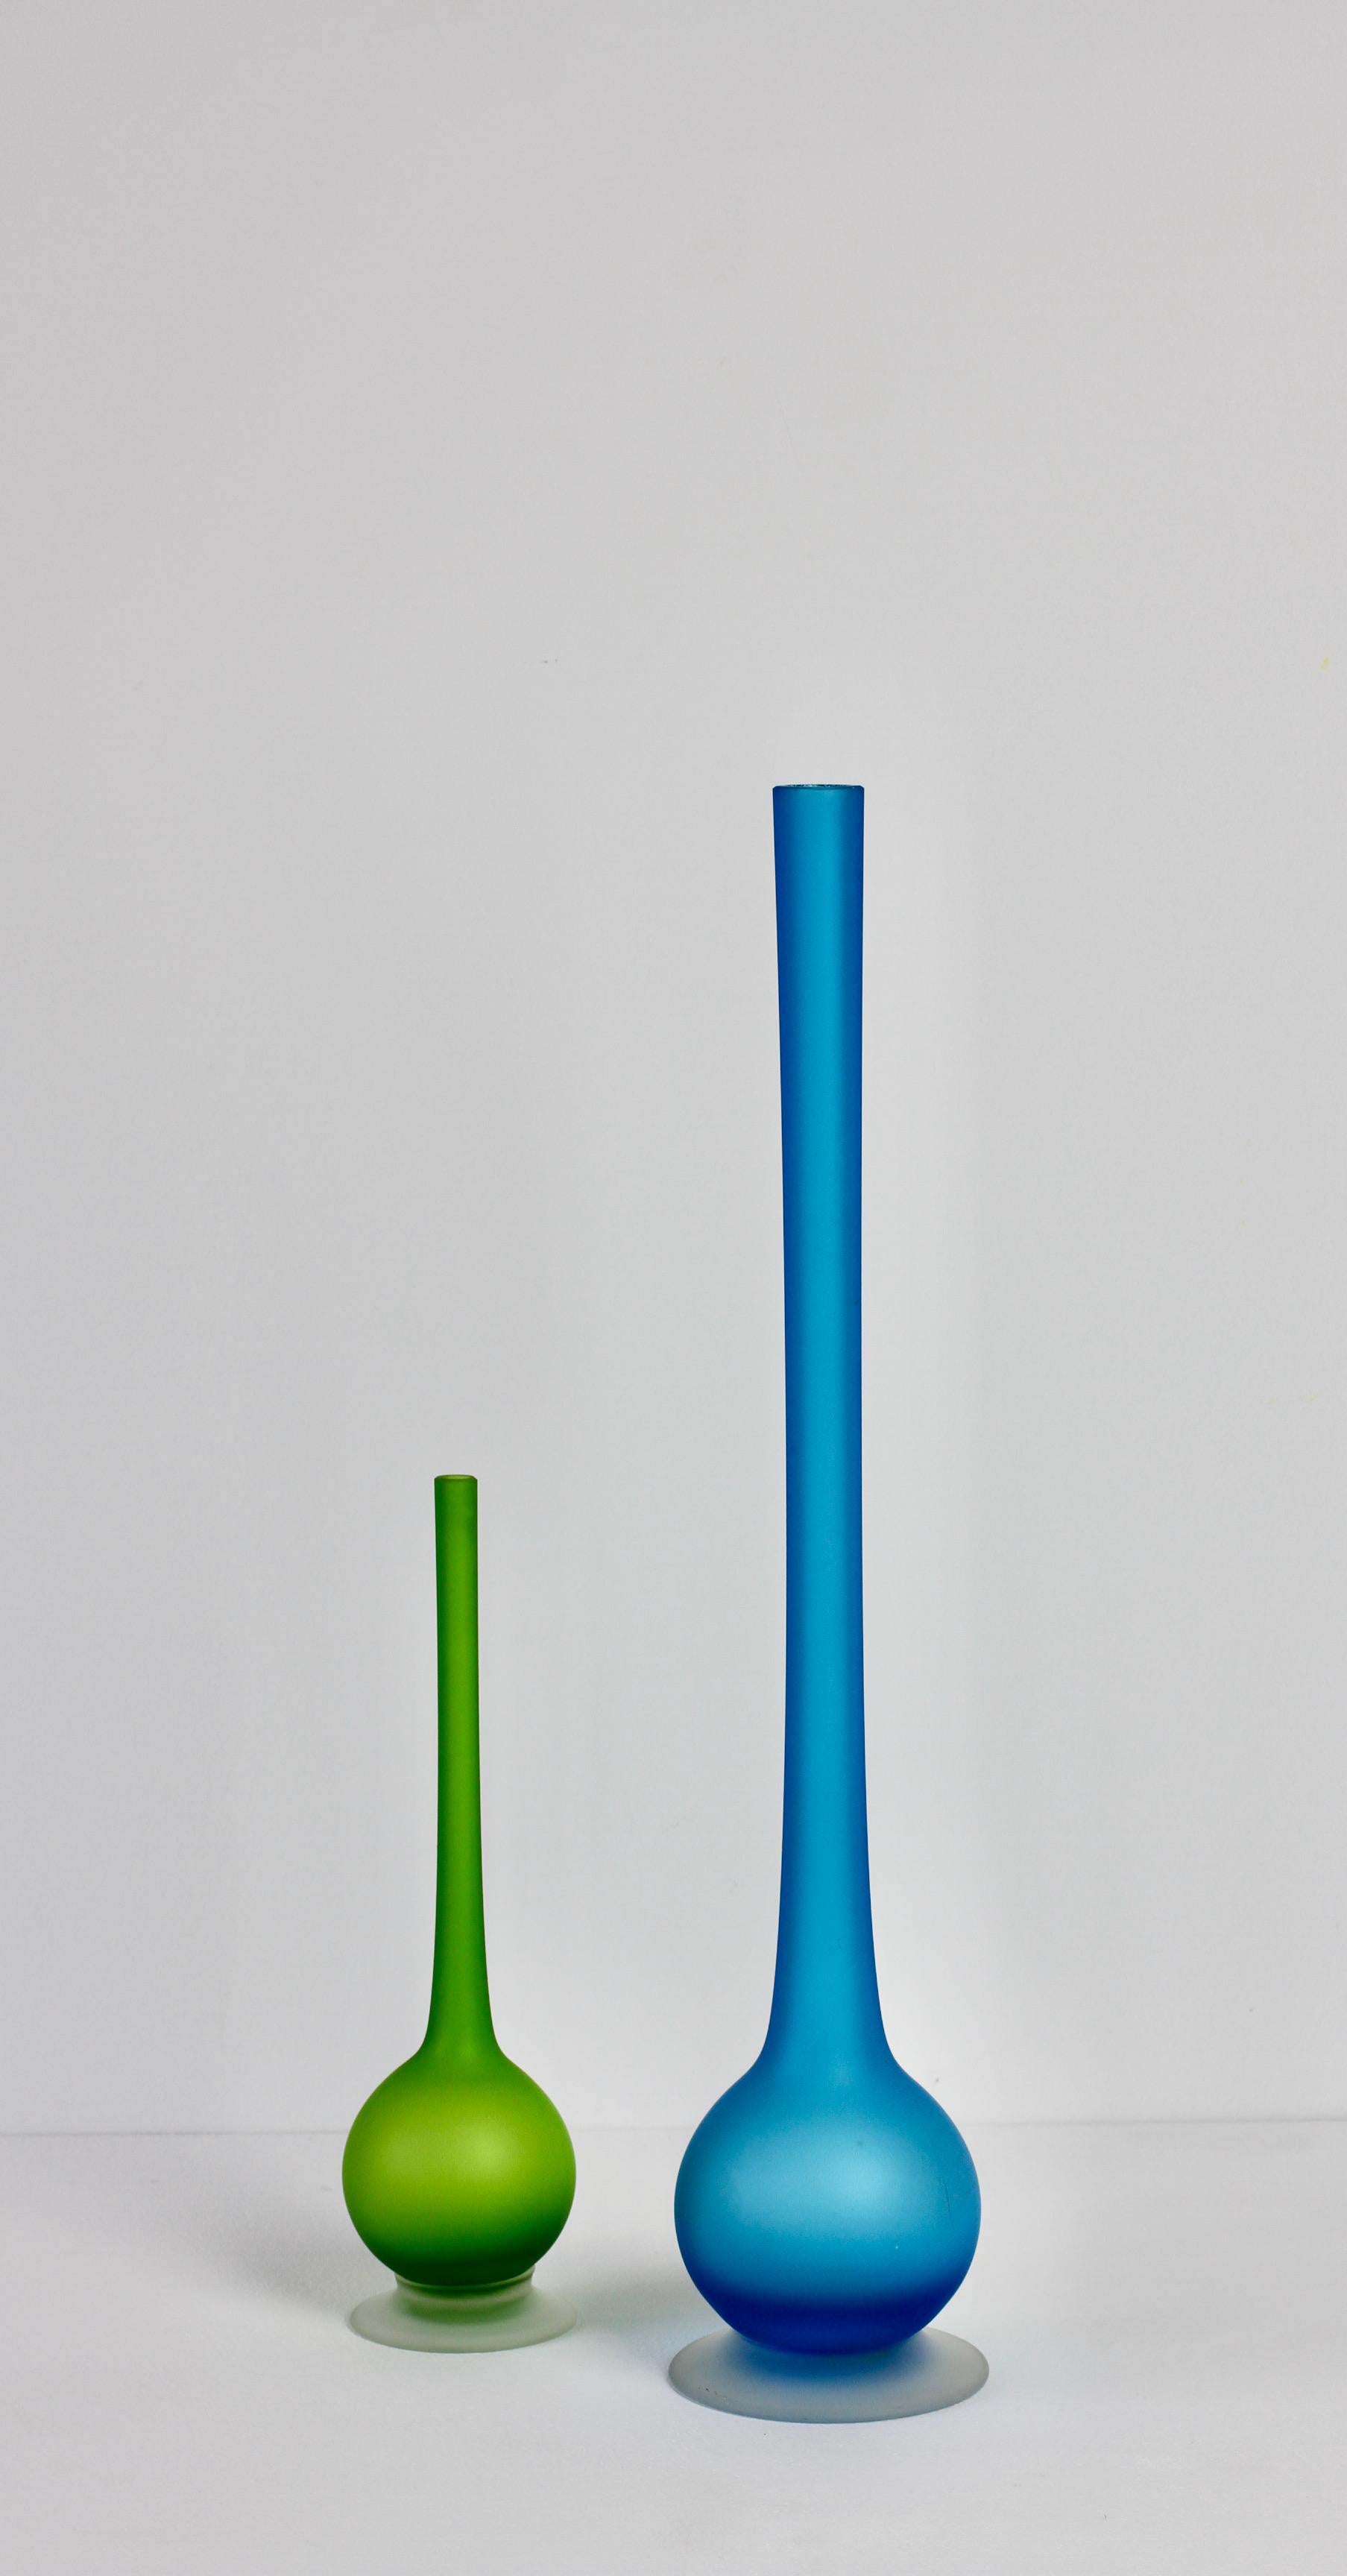 Rare, large Mid-Century Modern vibrant jellybean blue colored / coloured satin Murano glass pencil neck vases by Carlo Moretti (1934-2008), circa 1970.

An absolutely bold yet elegant design with the use of bright, vivid blue combined with the